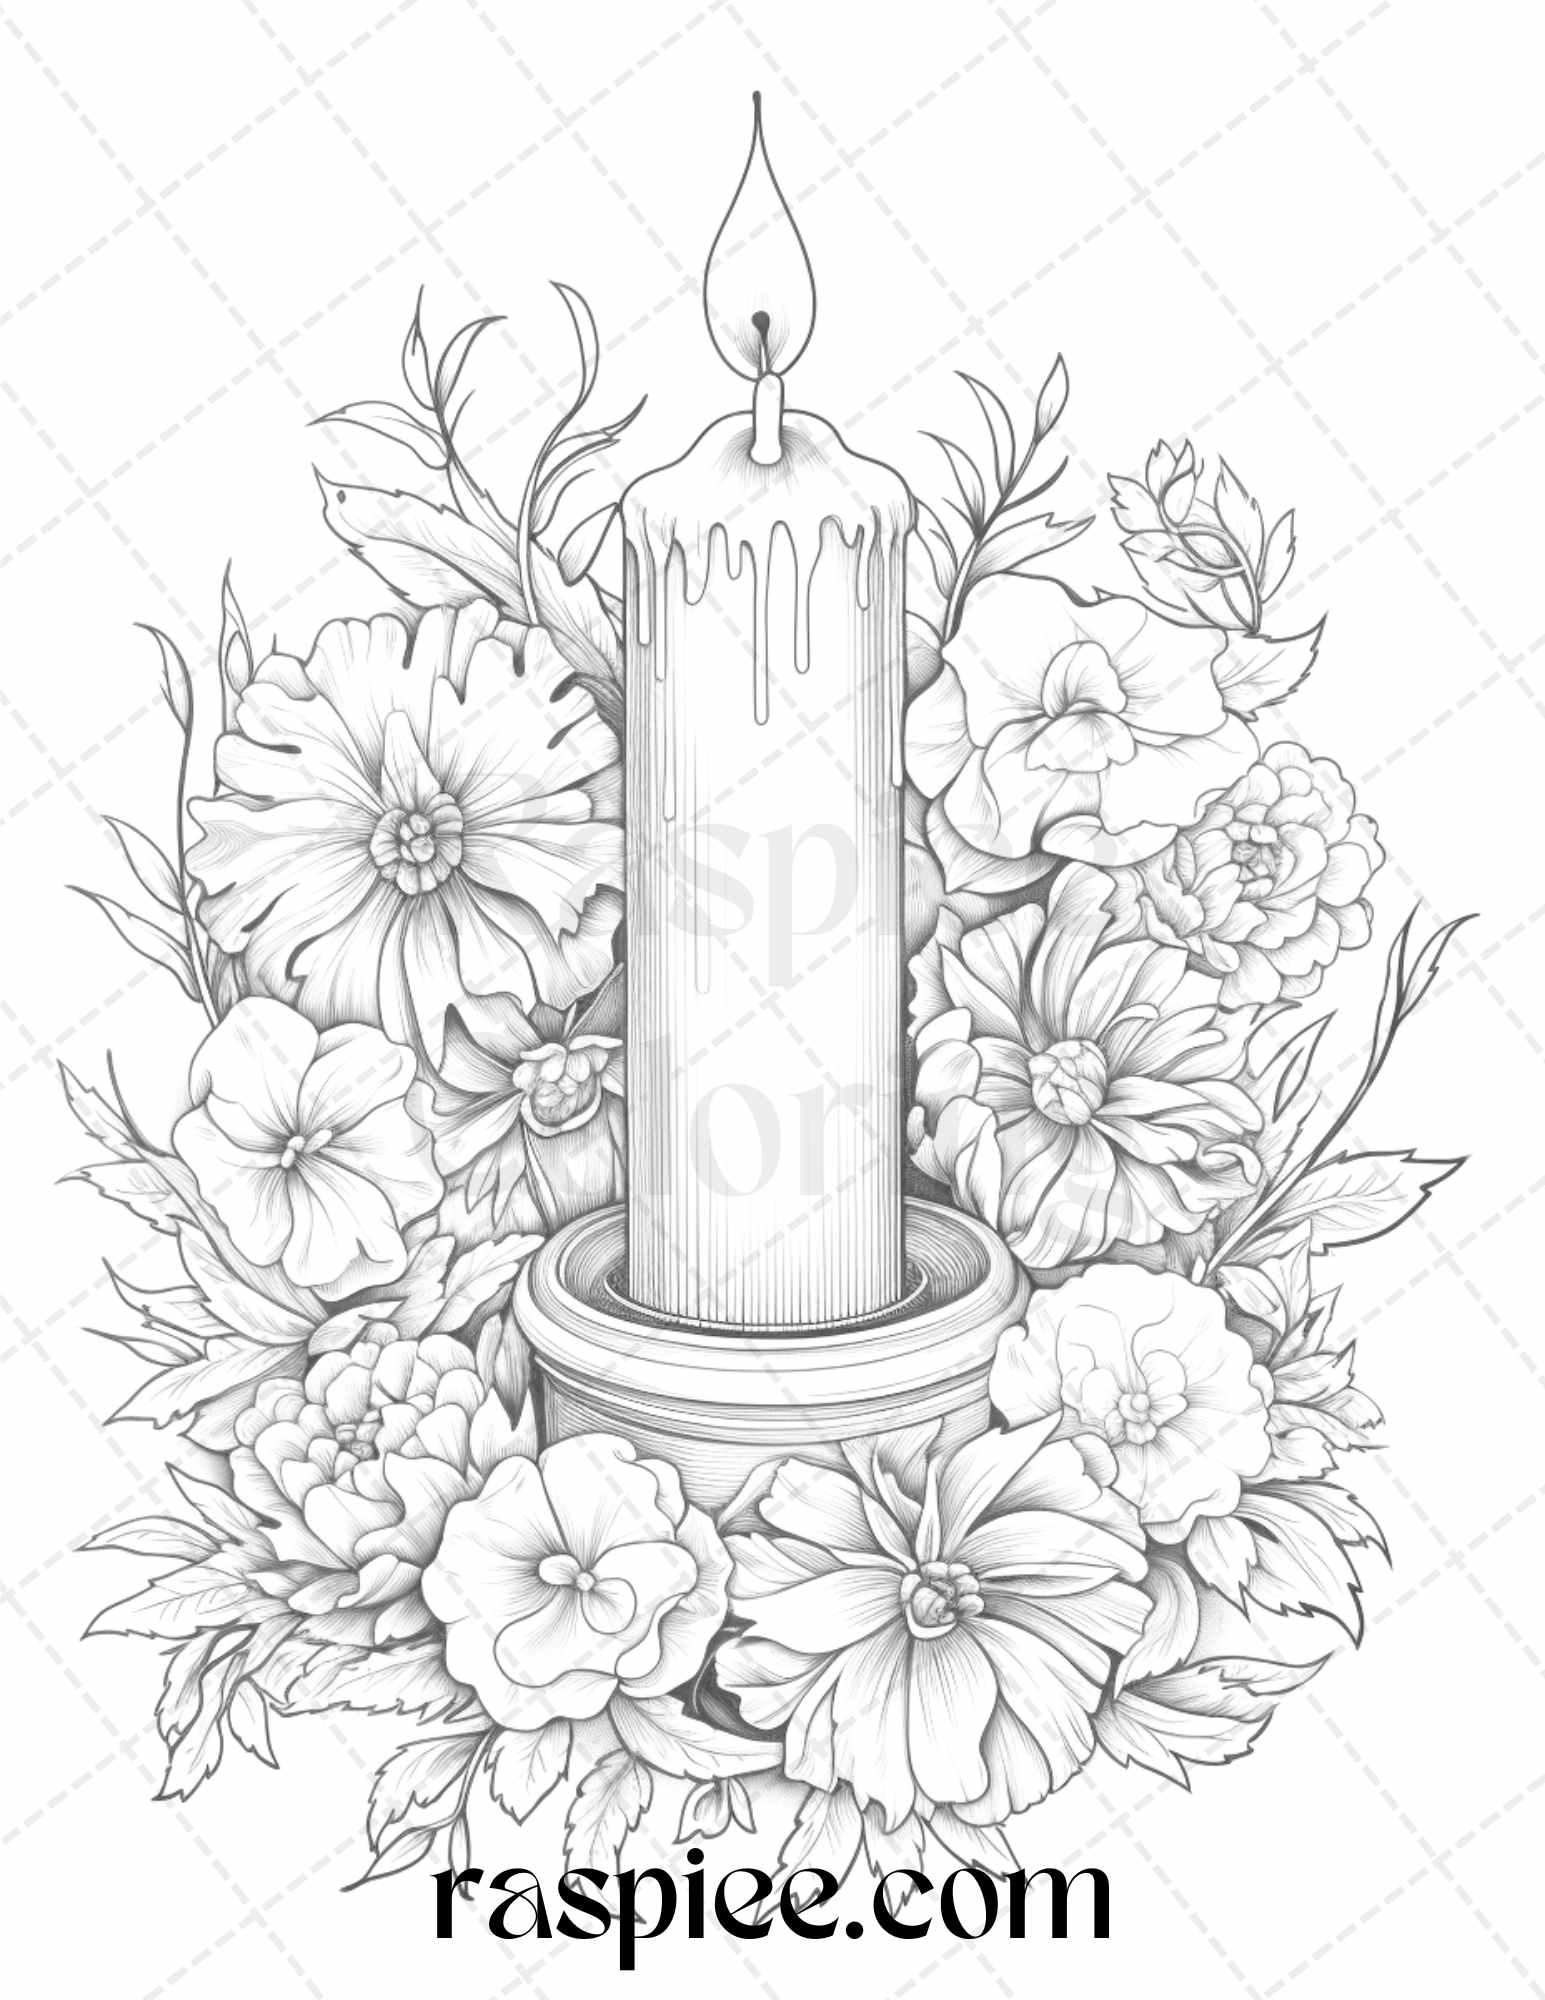 40 Flower Candles Grayscale Coloring Pages Printable for Adults, PDF File Instant Download - Raspiee Coloring